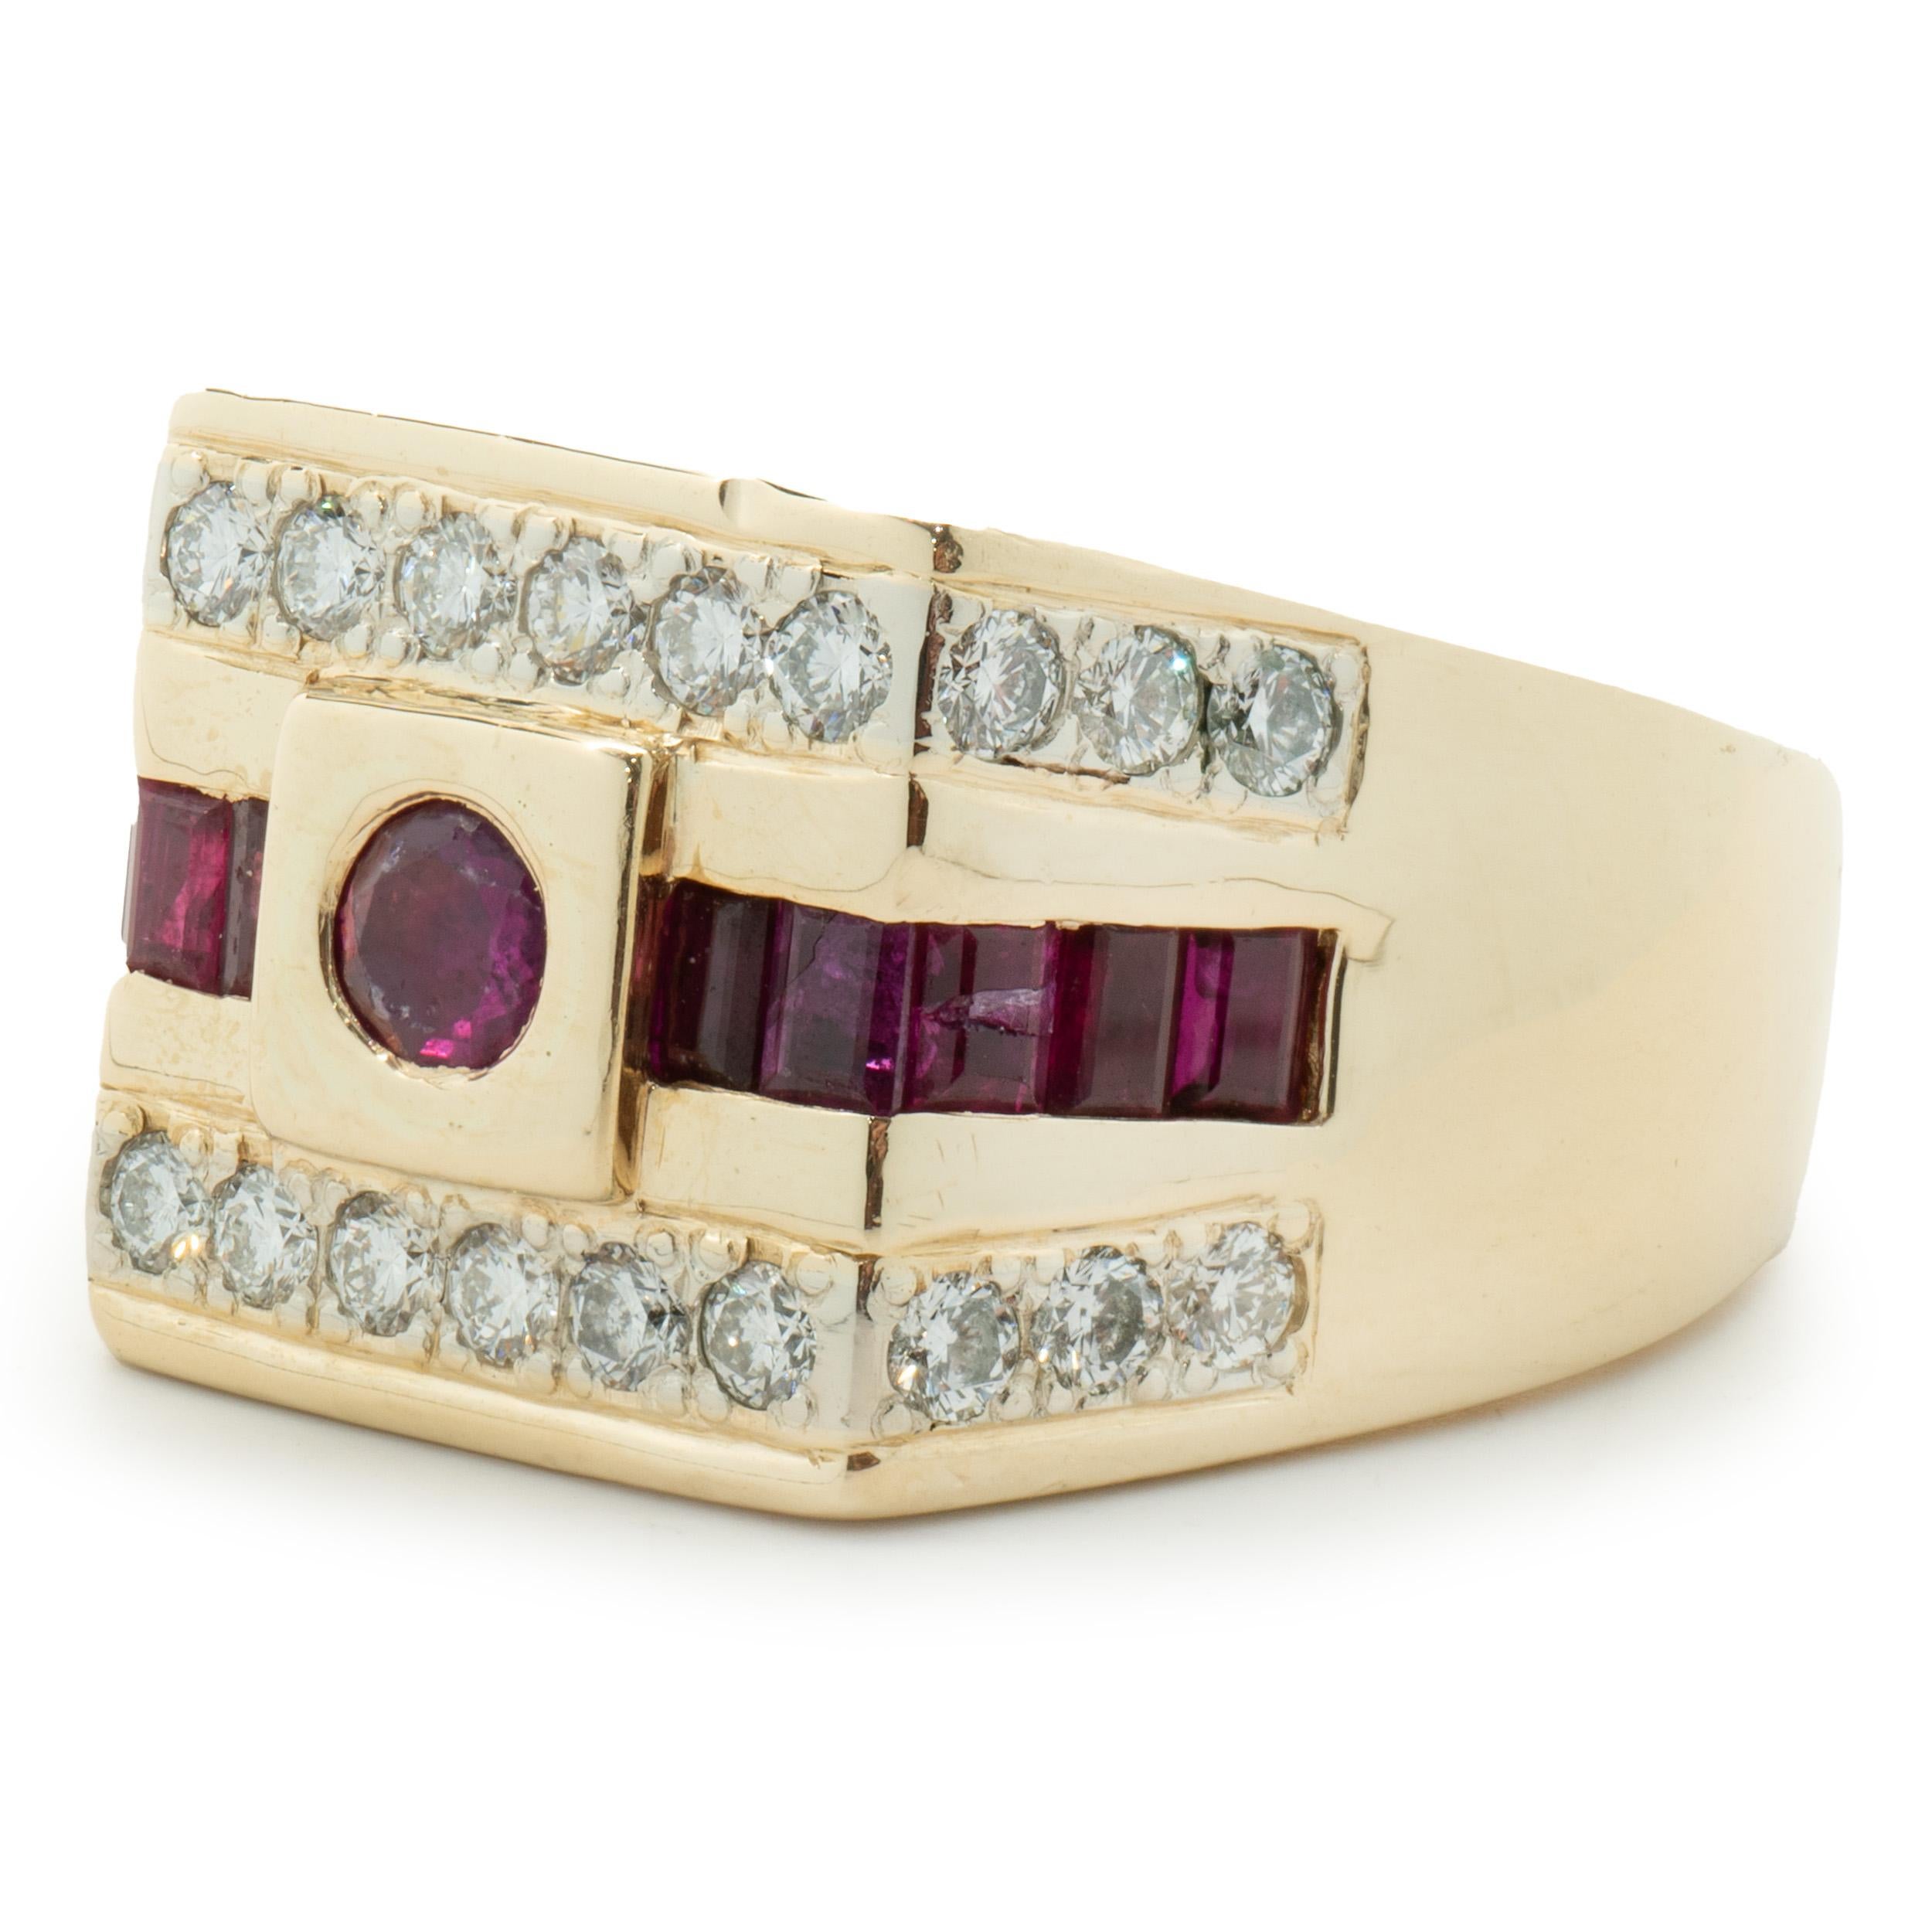 Designer: custom design
Material: 14K yellow gold
Diamond: 24 round brilliant cut = 1.20cttw
Color: G
Clarity: SI1-2
Ruby: 11 round and princess cut = 1.65cttw
Dimensions: ring top measures 16mm wide
Ring Size: 13 (please allow two extra shipping